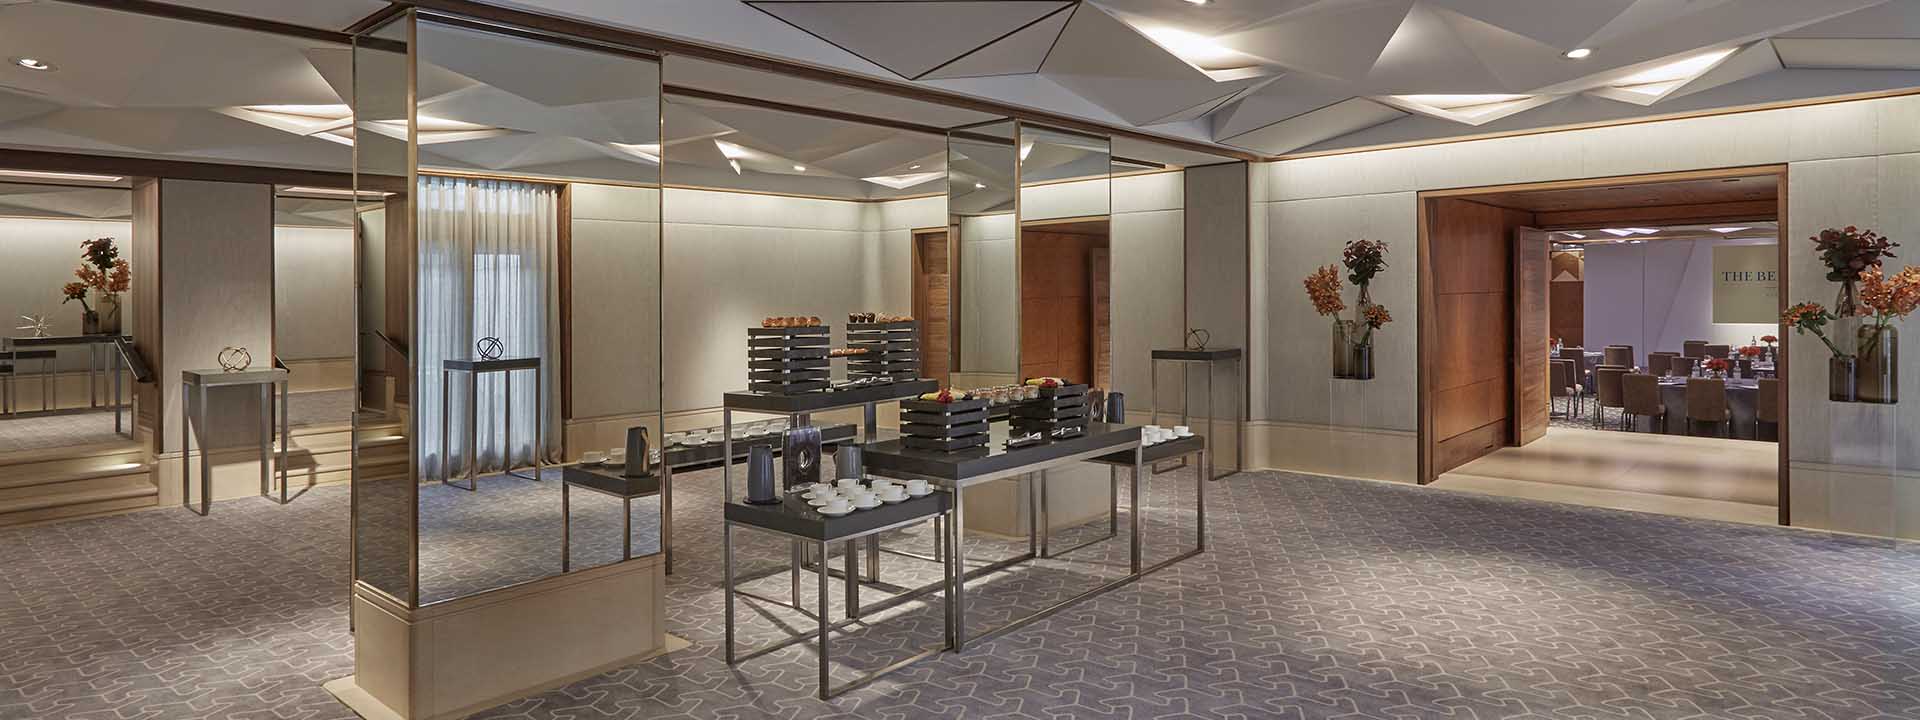 The buffet is ready in one of the rooms in the modern interior with mirrors in the Belgravia Room.